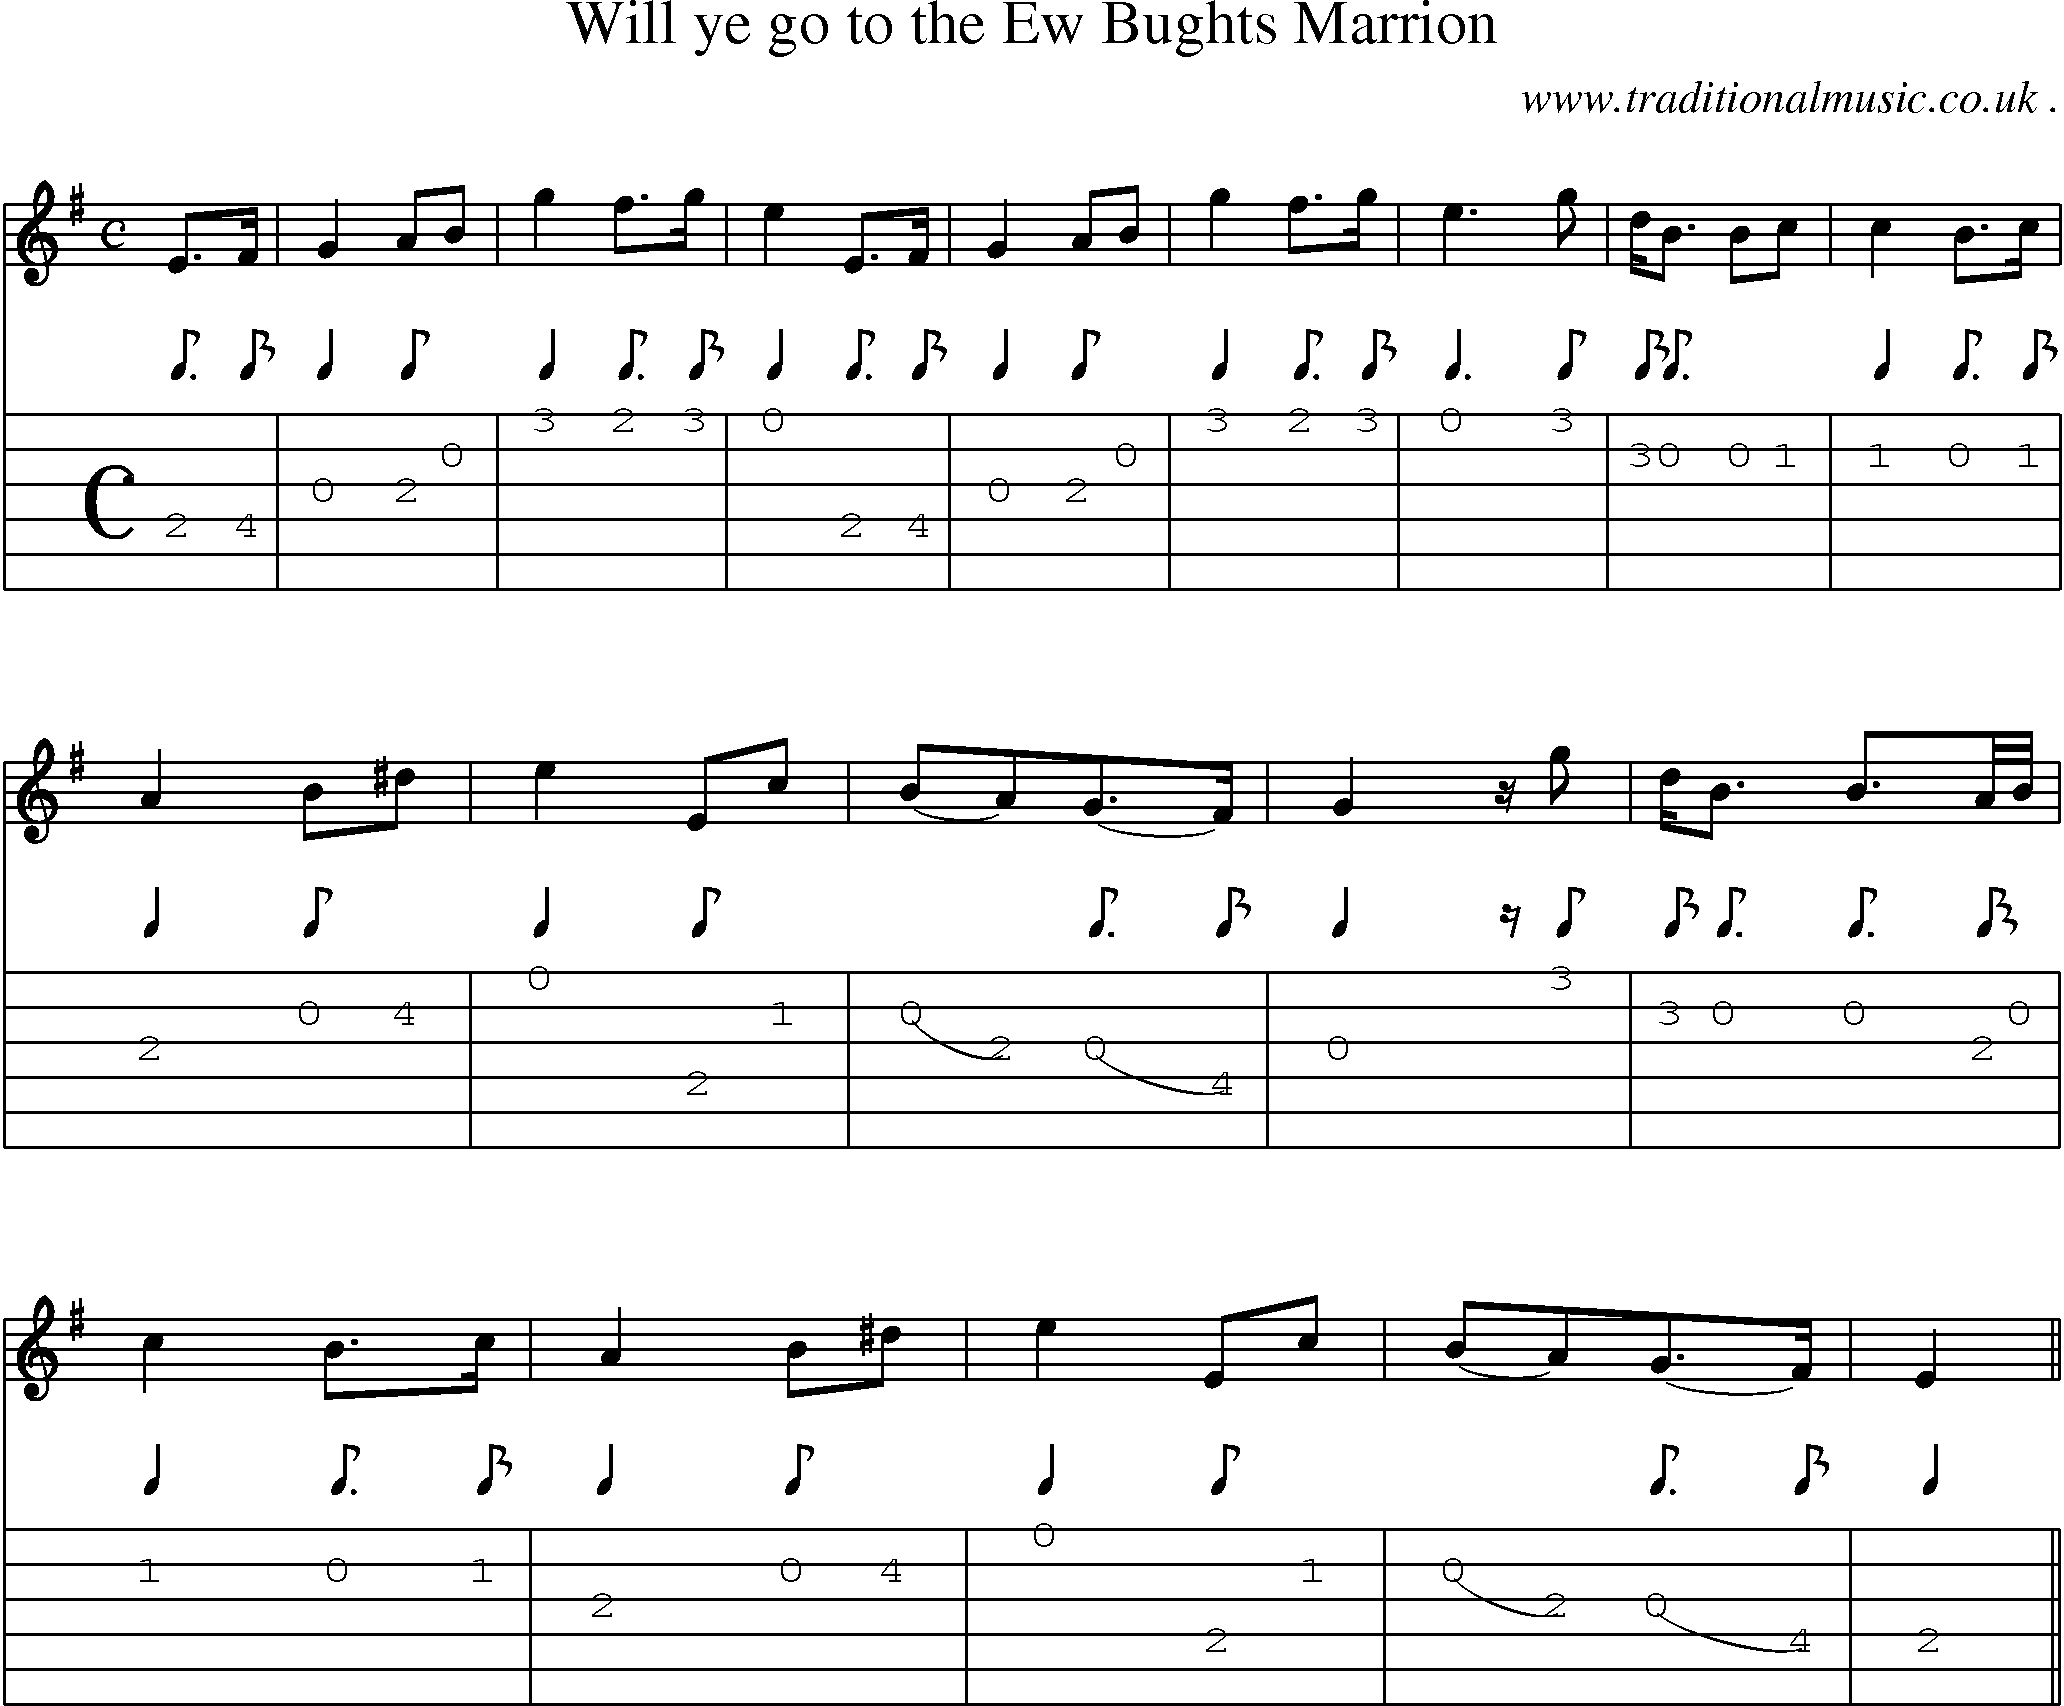 Sheet-Music and Guitar Tabs for Will Ye Go To The Ew Bughts Marrion